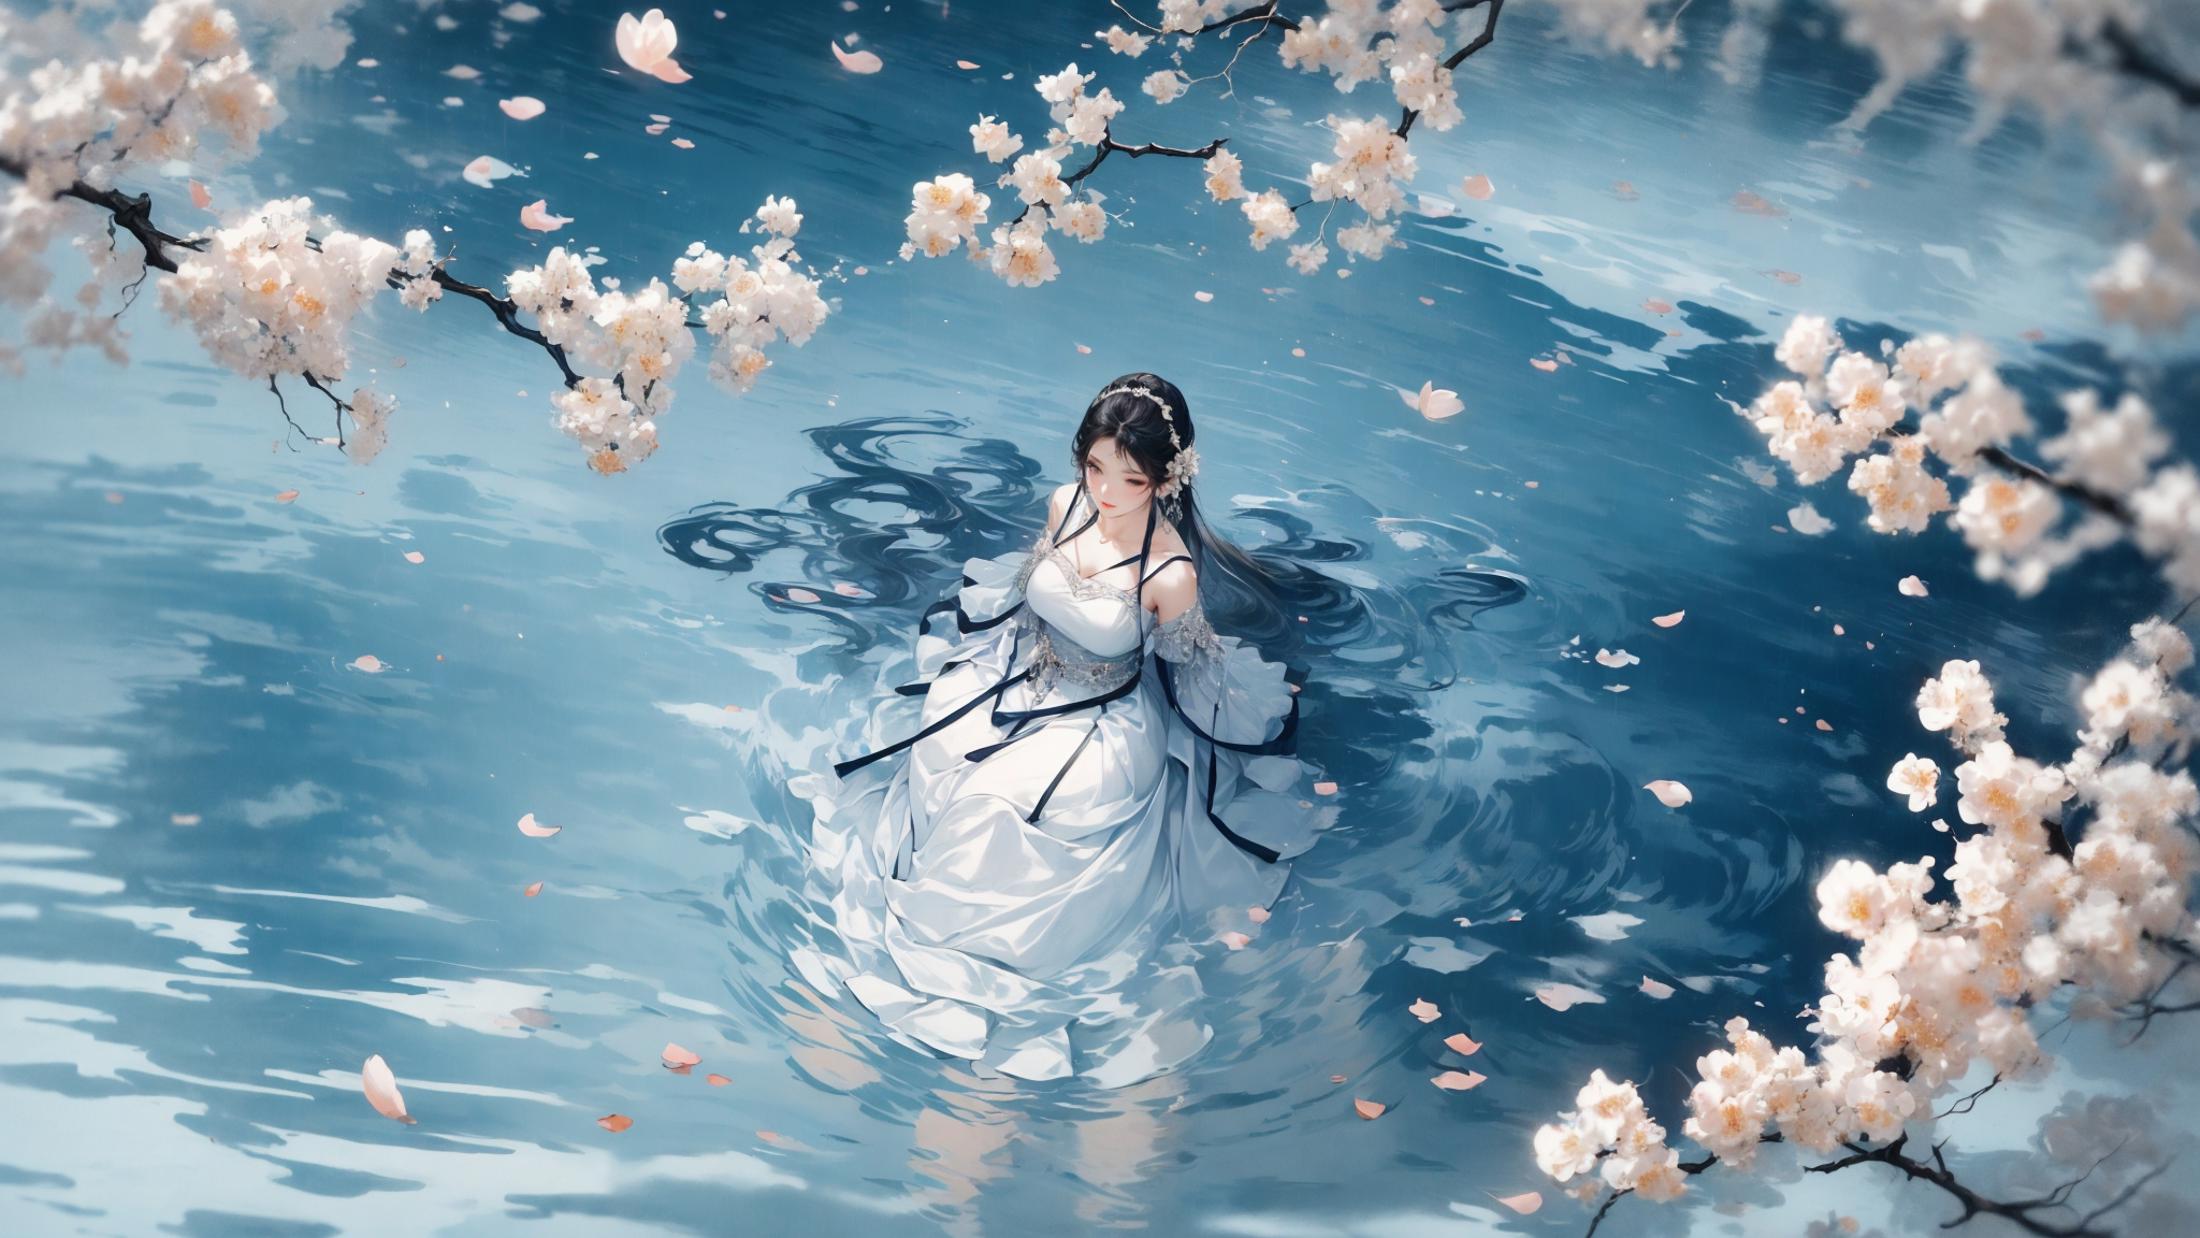 A young woman in a white dress floating in a lake.